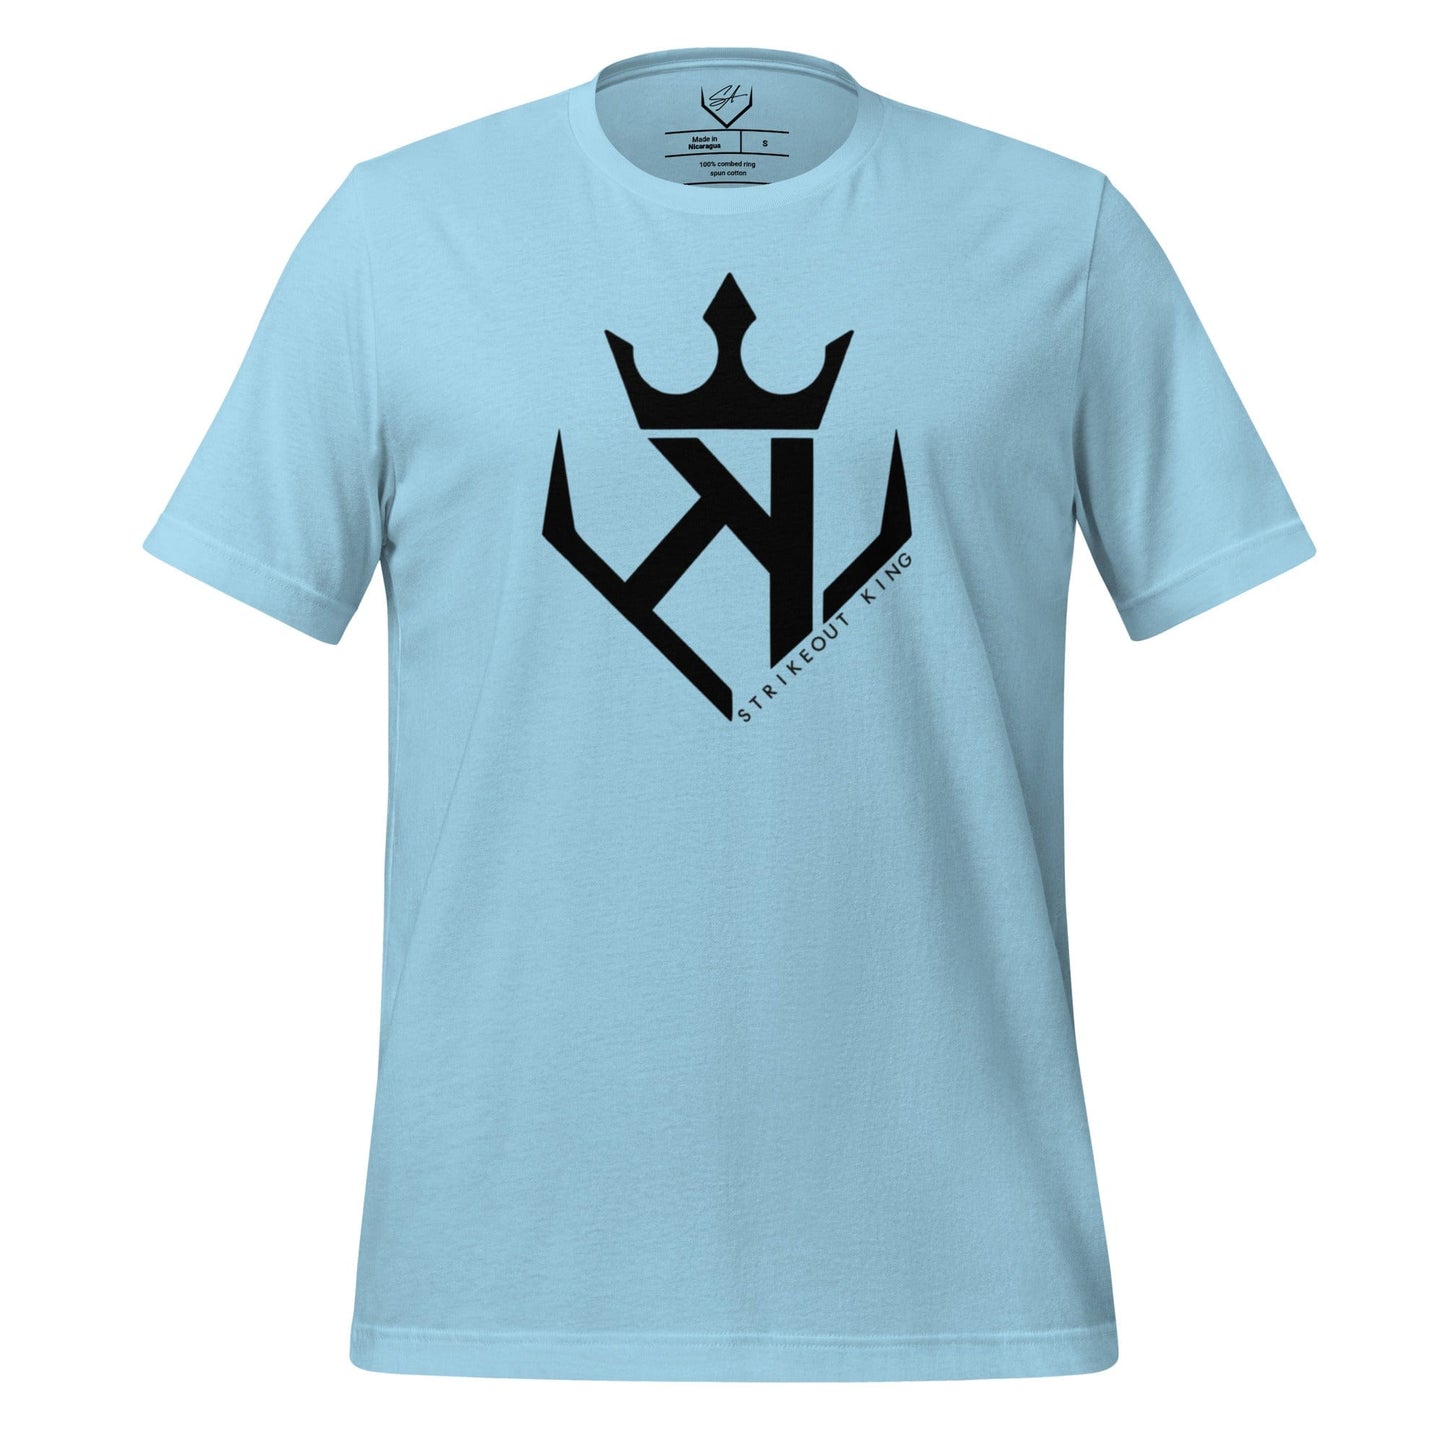 Strikeout King - Adult Tee